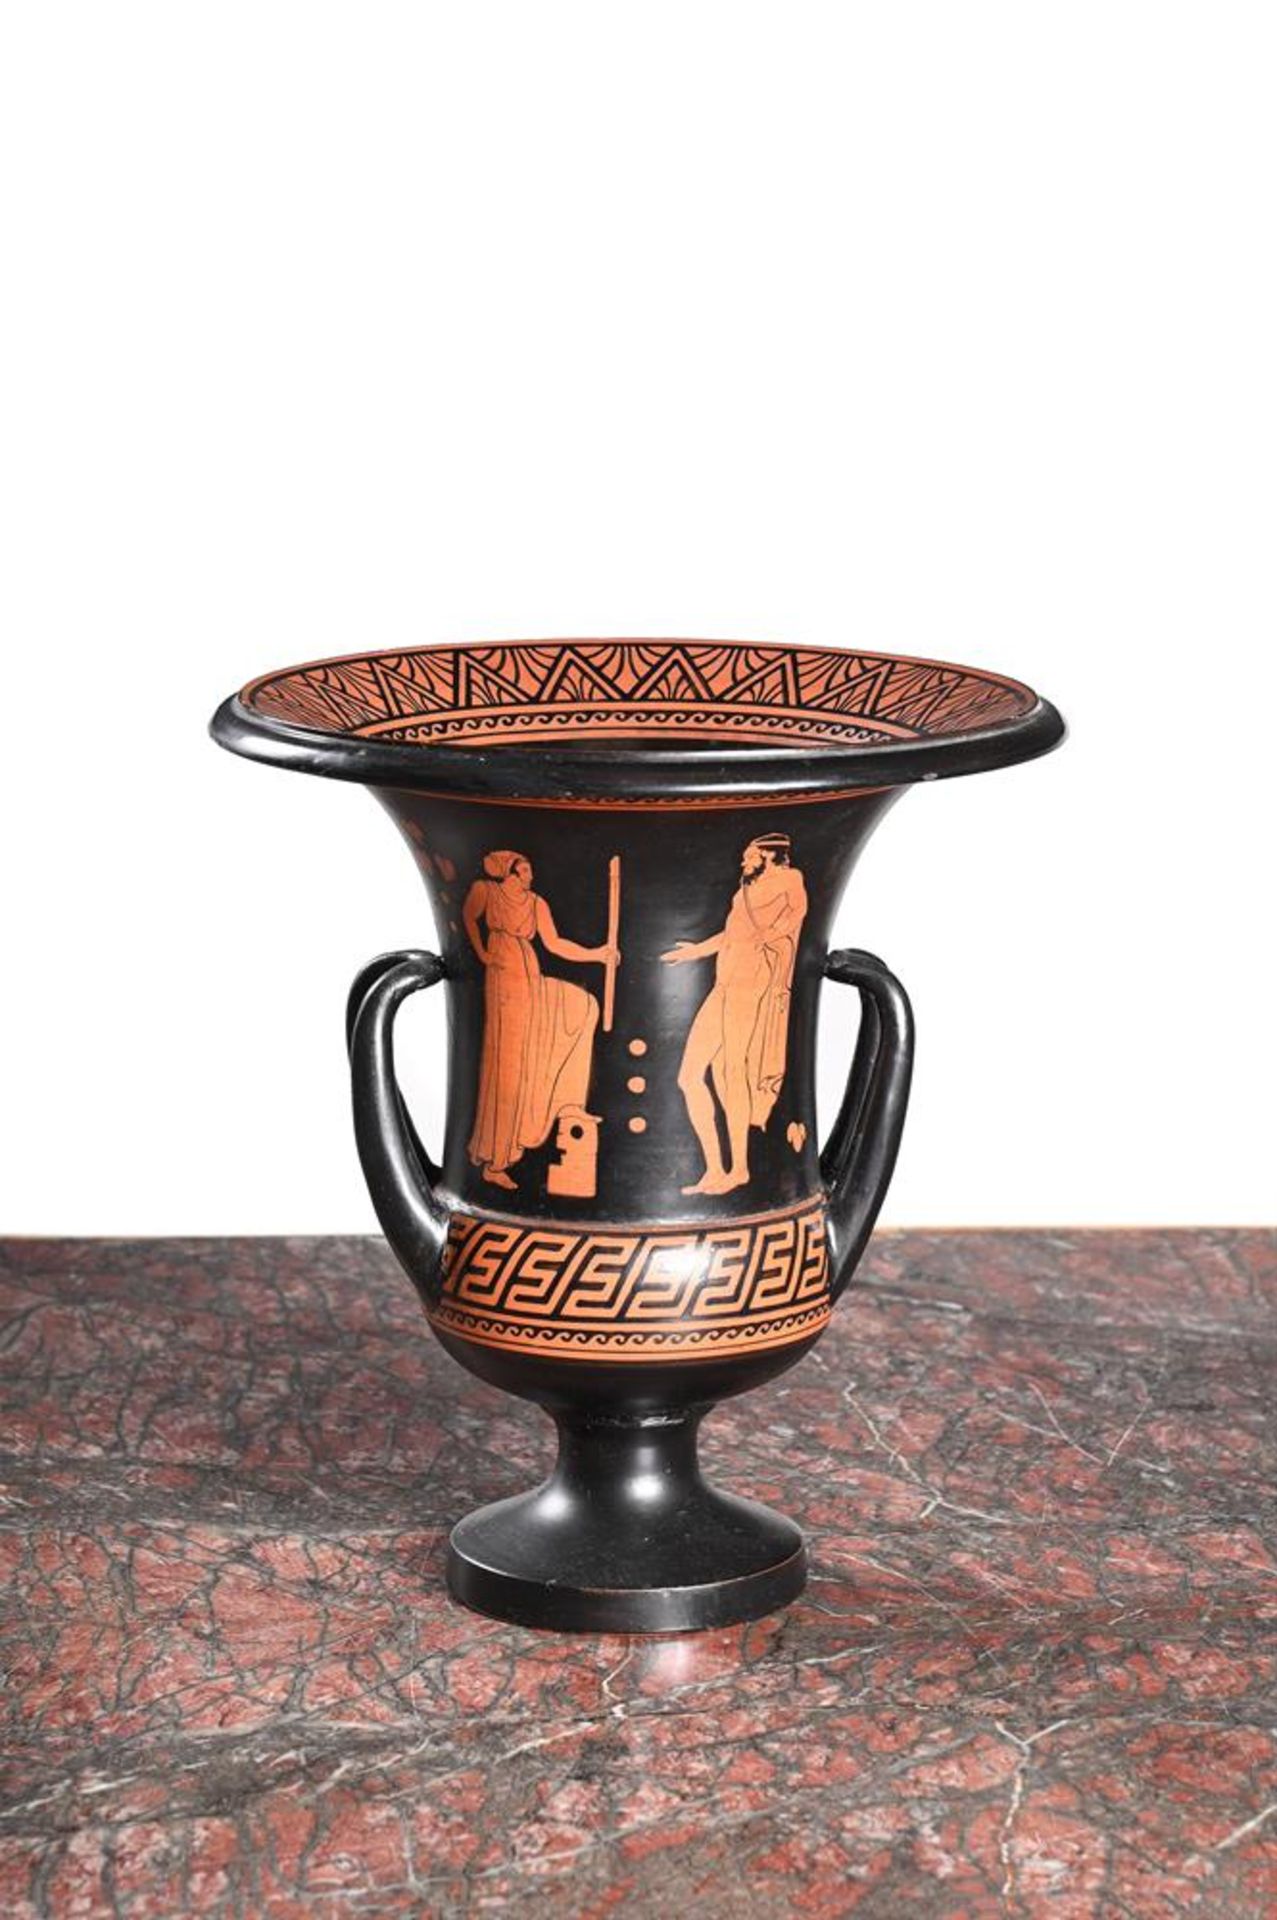 A CHIRINTO DEL VECCHIO CALYX KRATER VASE IN THE GREEK STYLE, MID 19TH CENTURY - Image 2 of 2